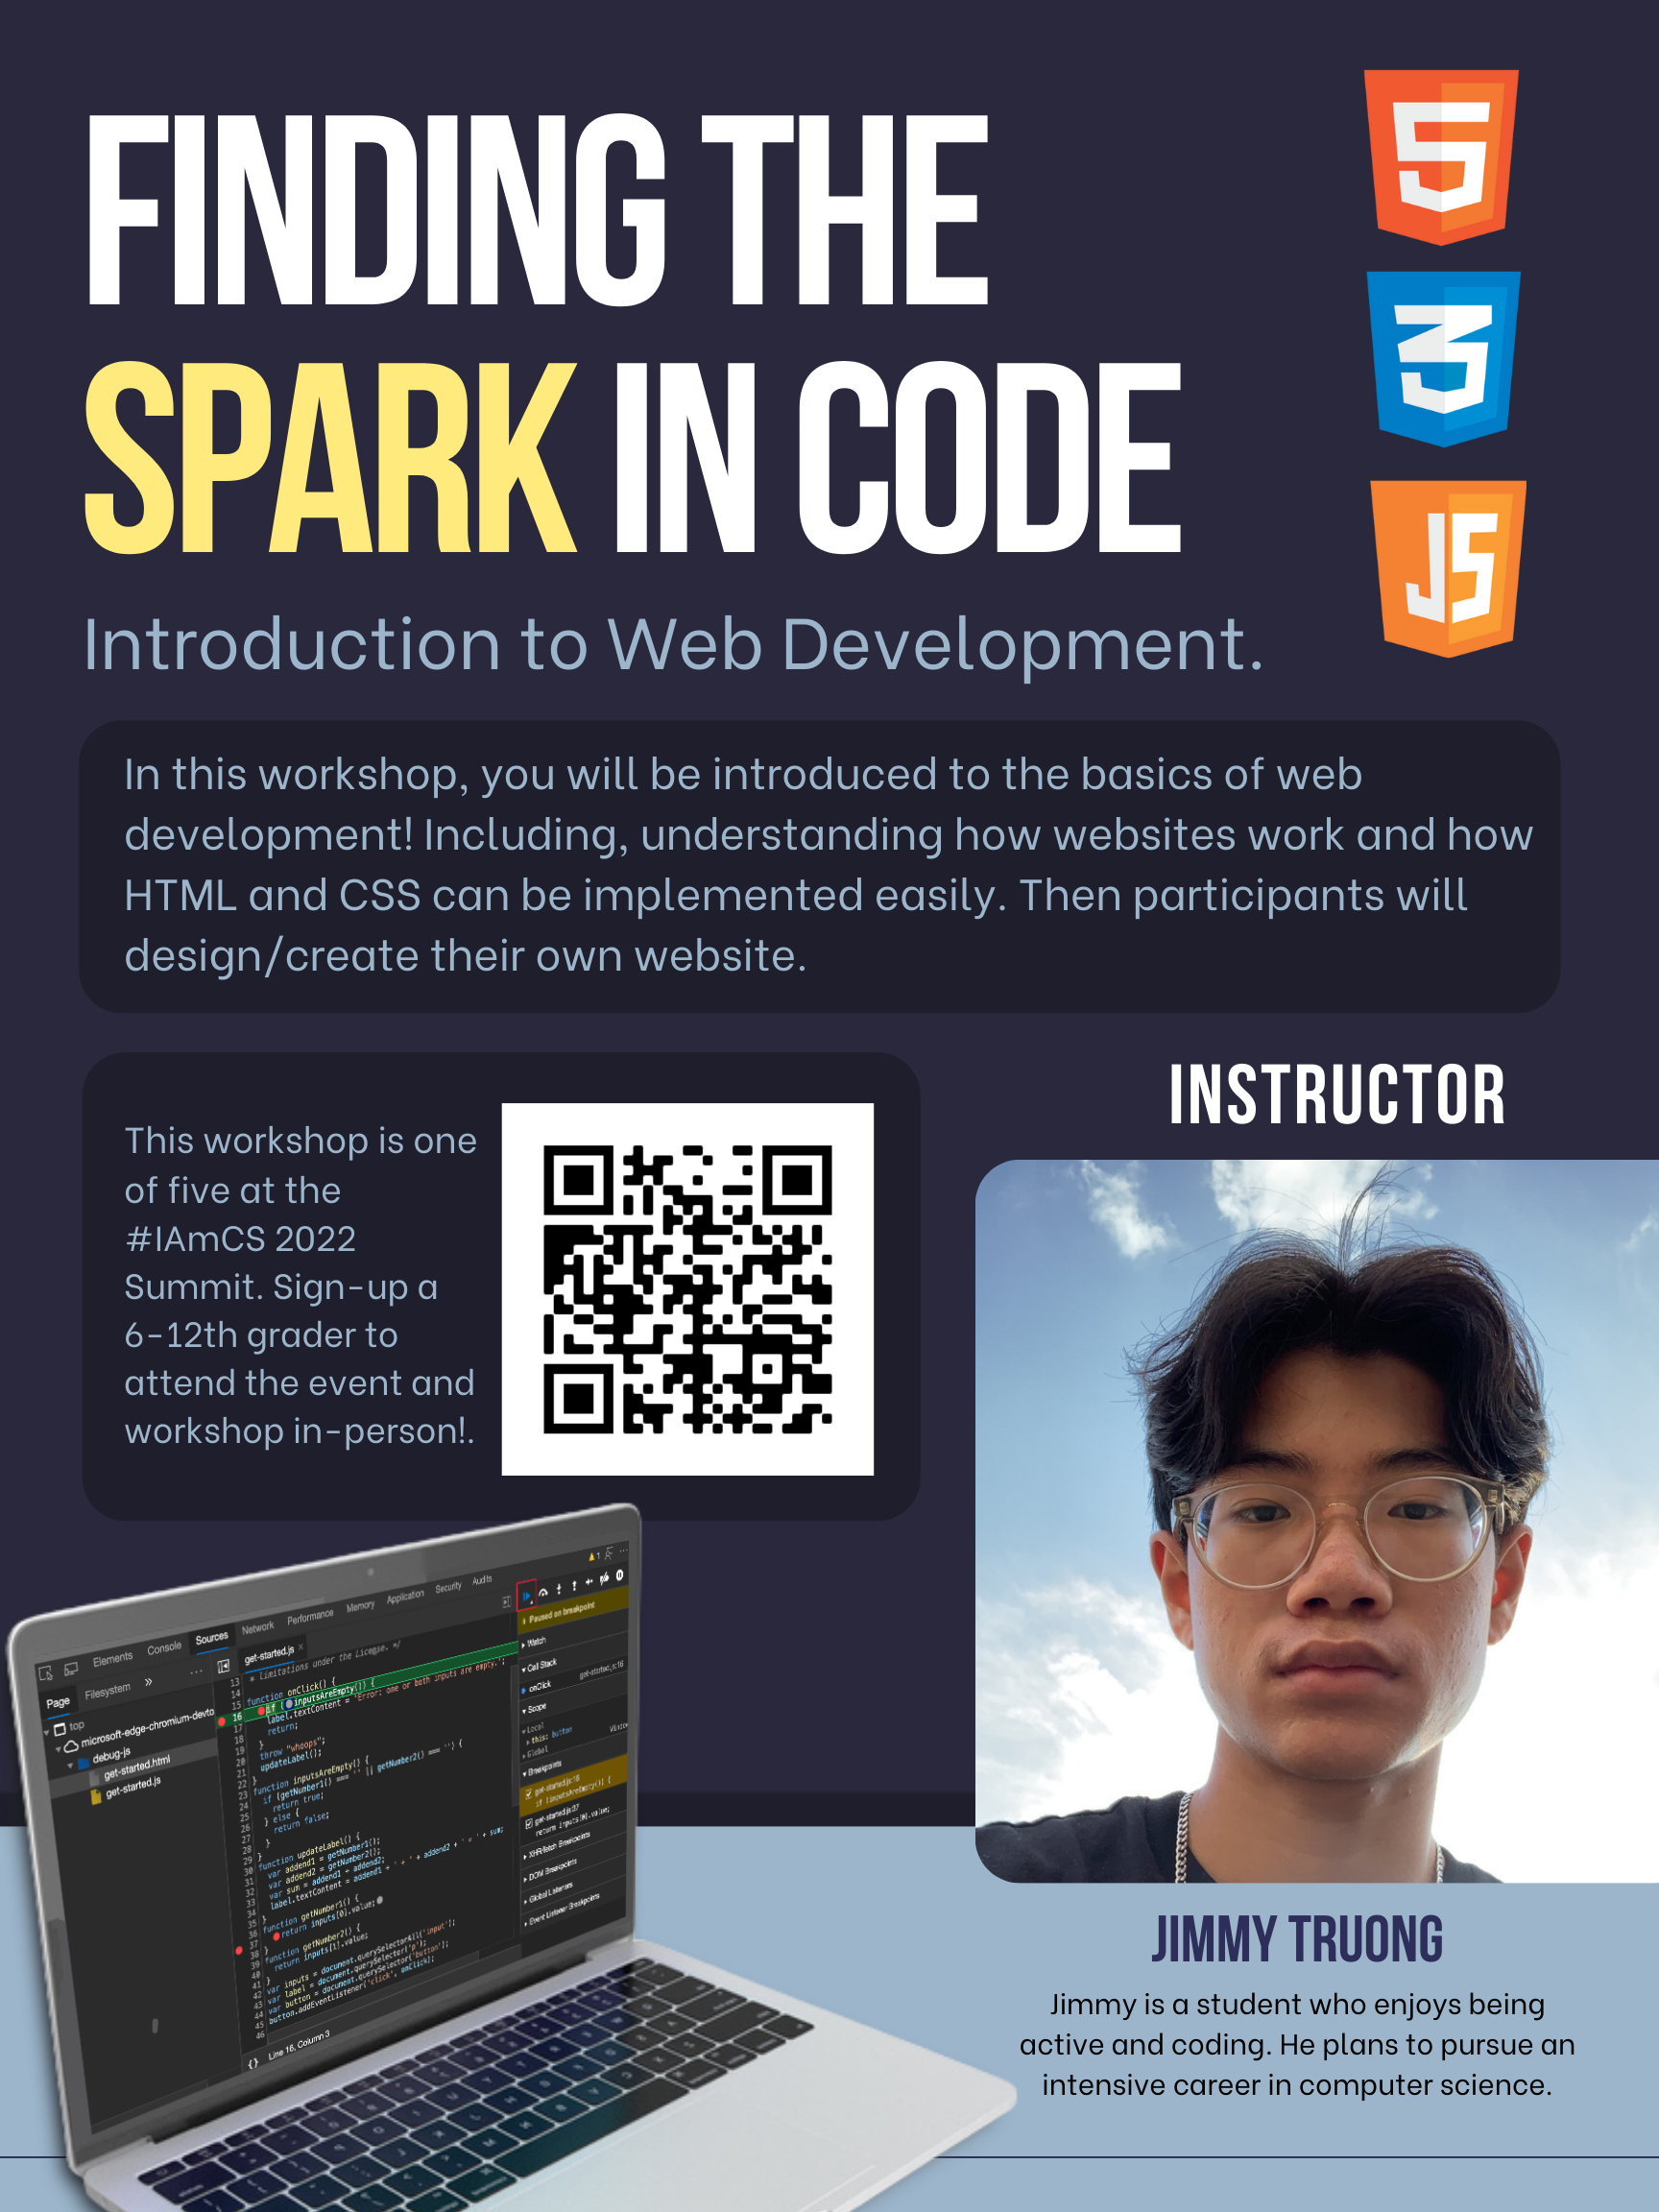 Finding the Spark in Code: Introduction to Web Development